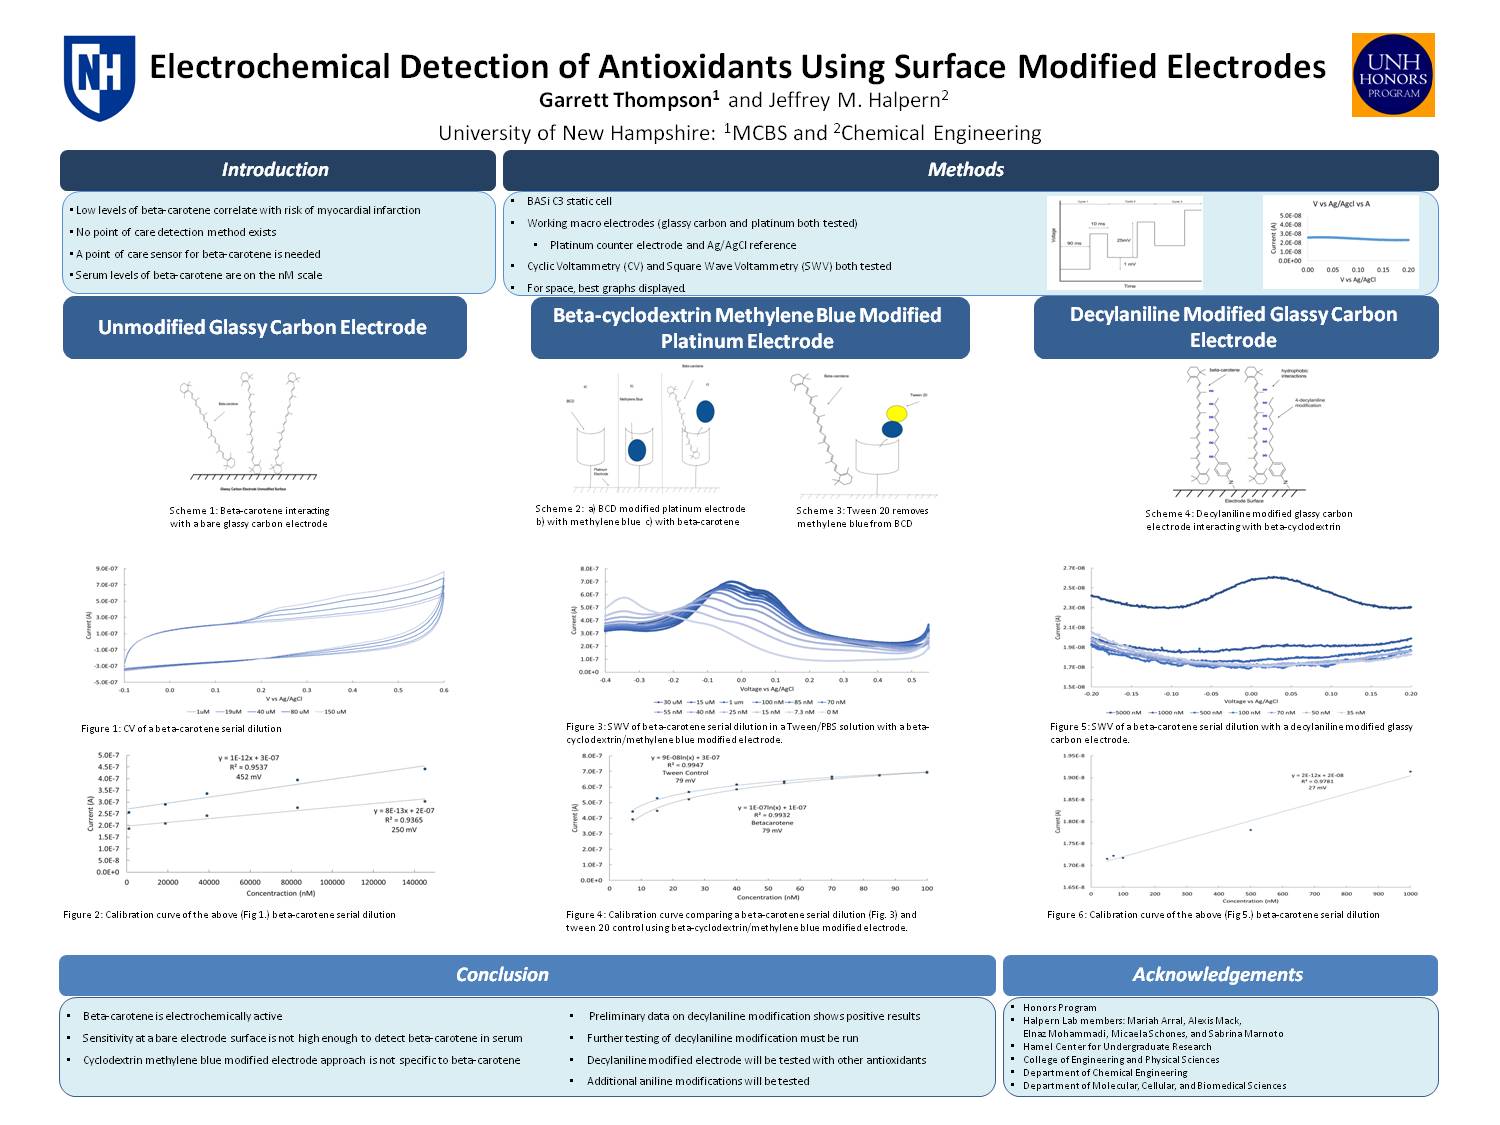 Electrochemical Detection Of Antioxidants Using Surface Modified Electrodes by gsv23